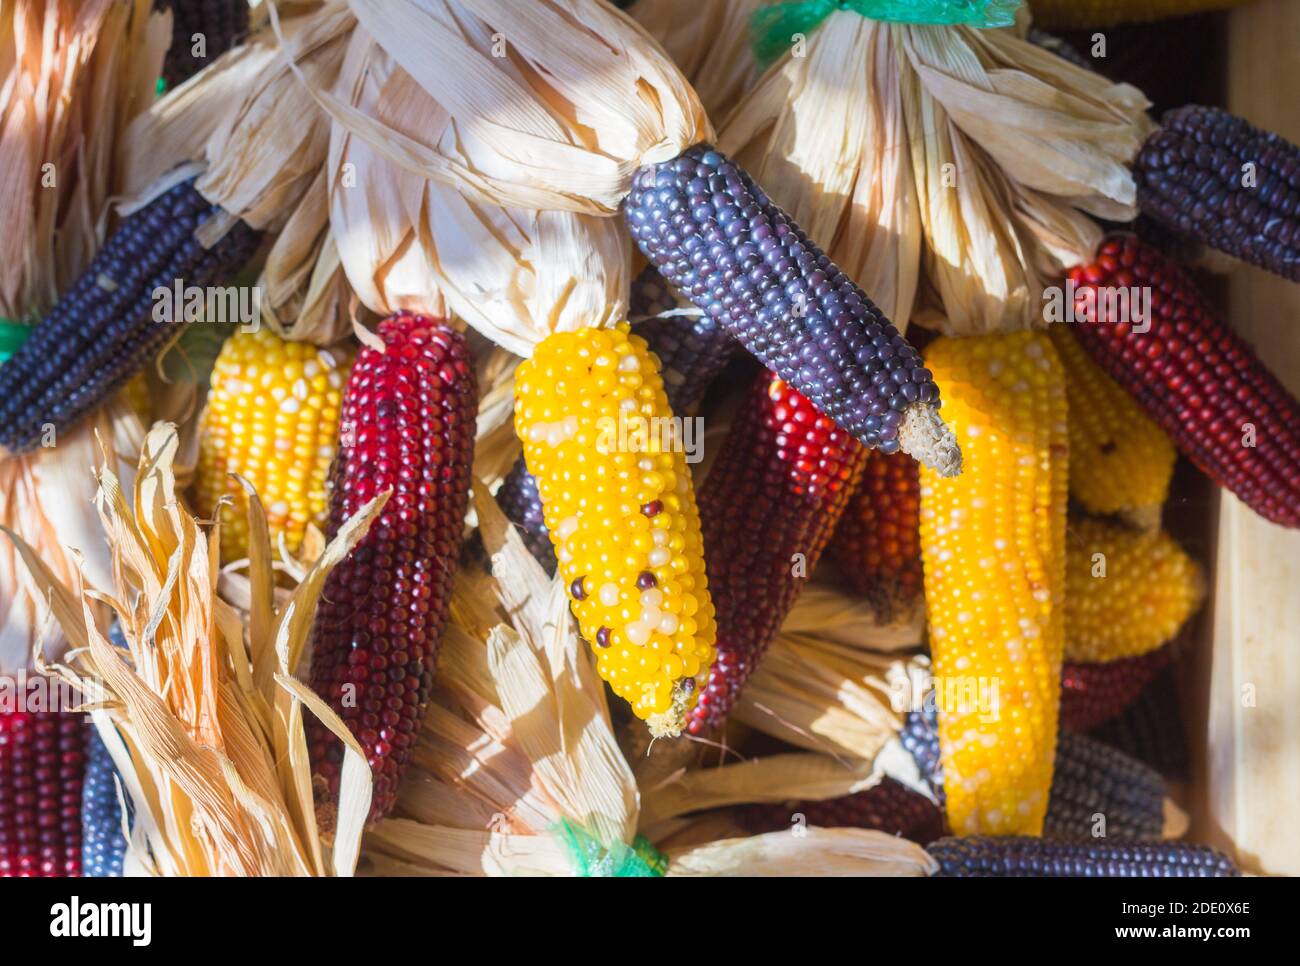 Different kinds of corn at a street side market in Takayama, Japan Stock Photo